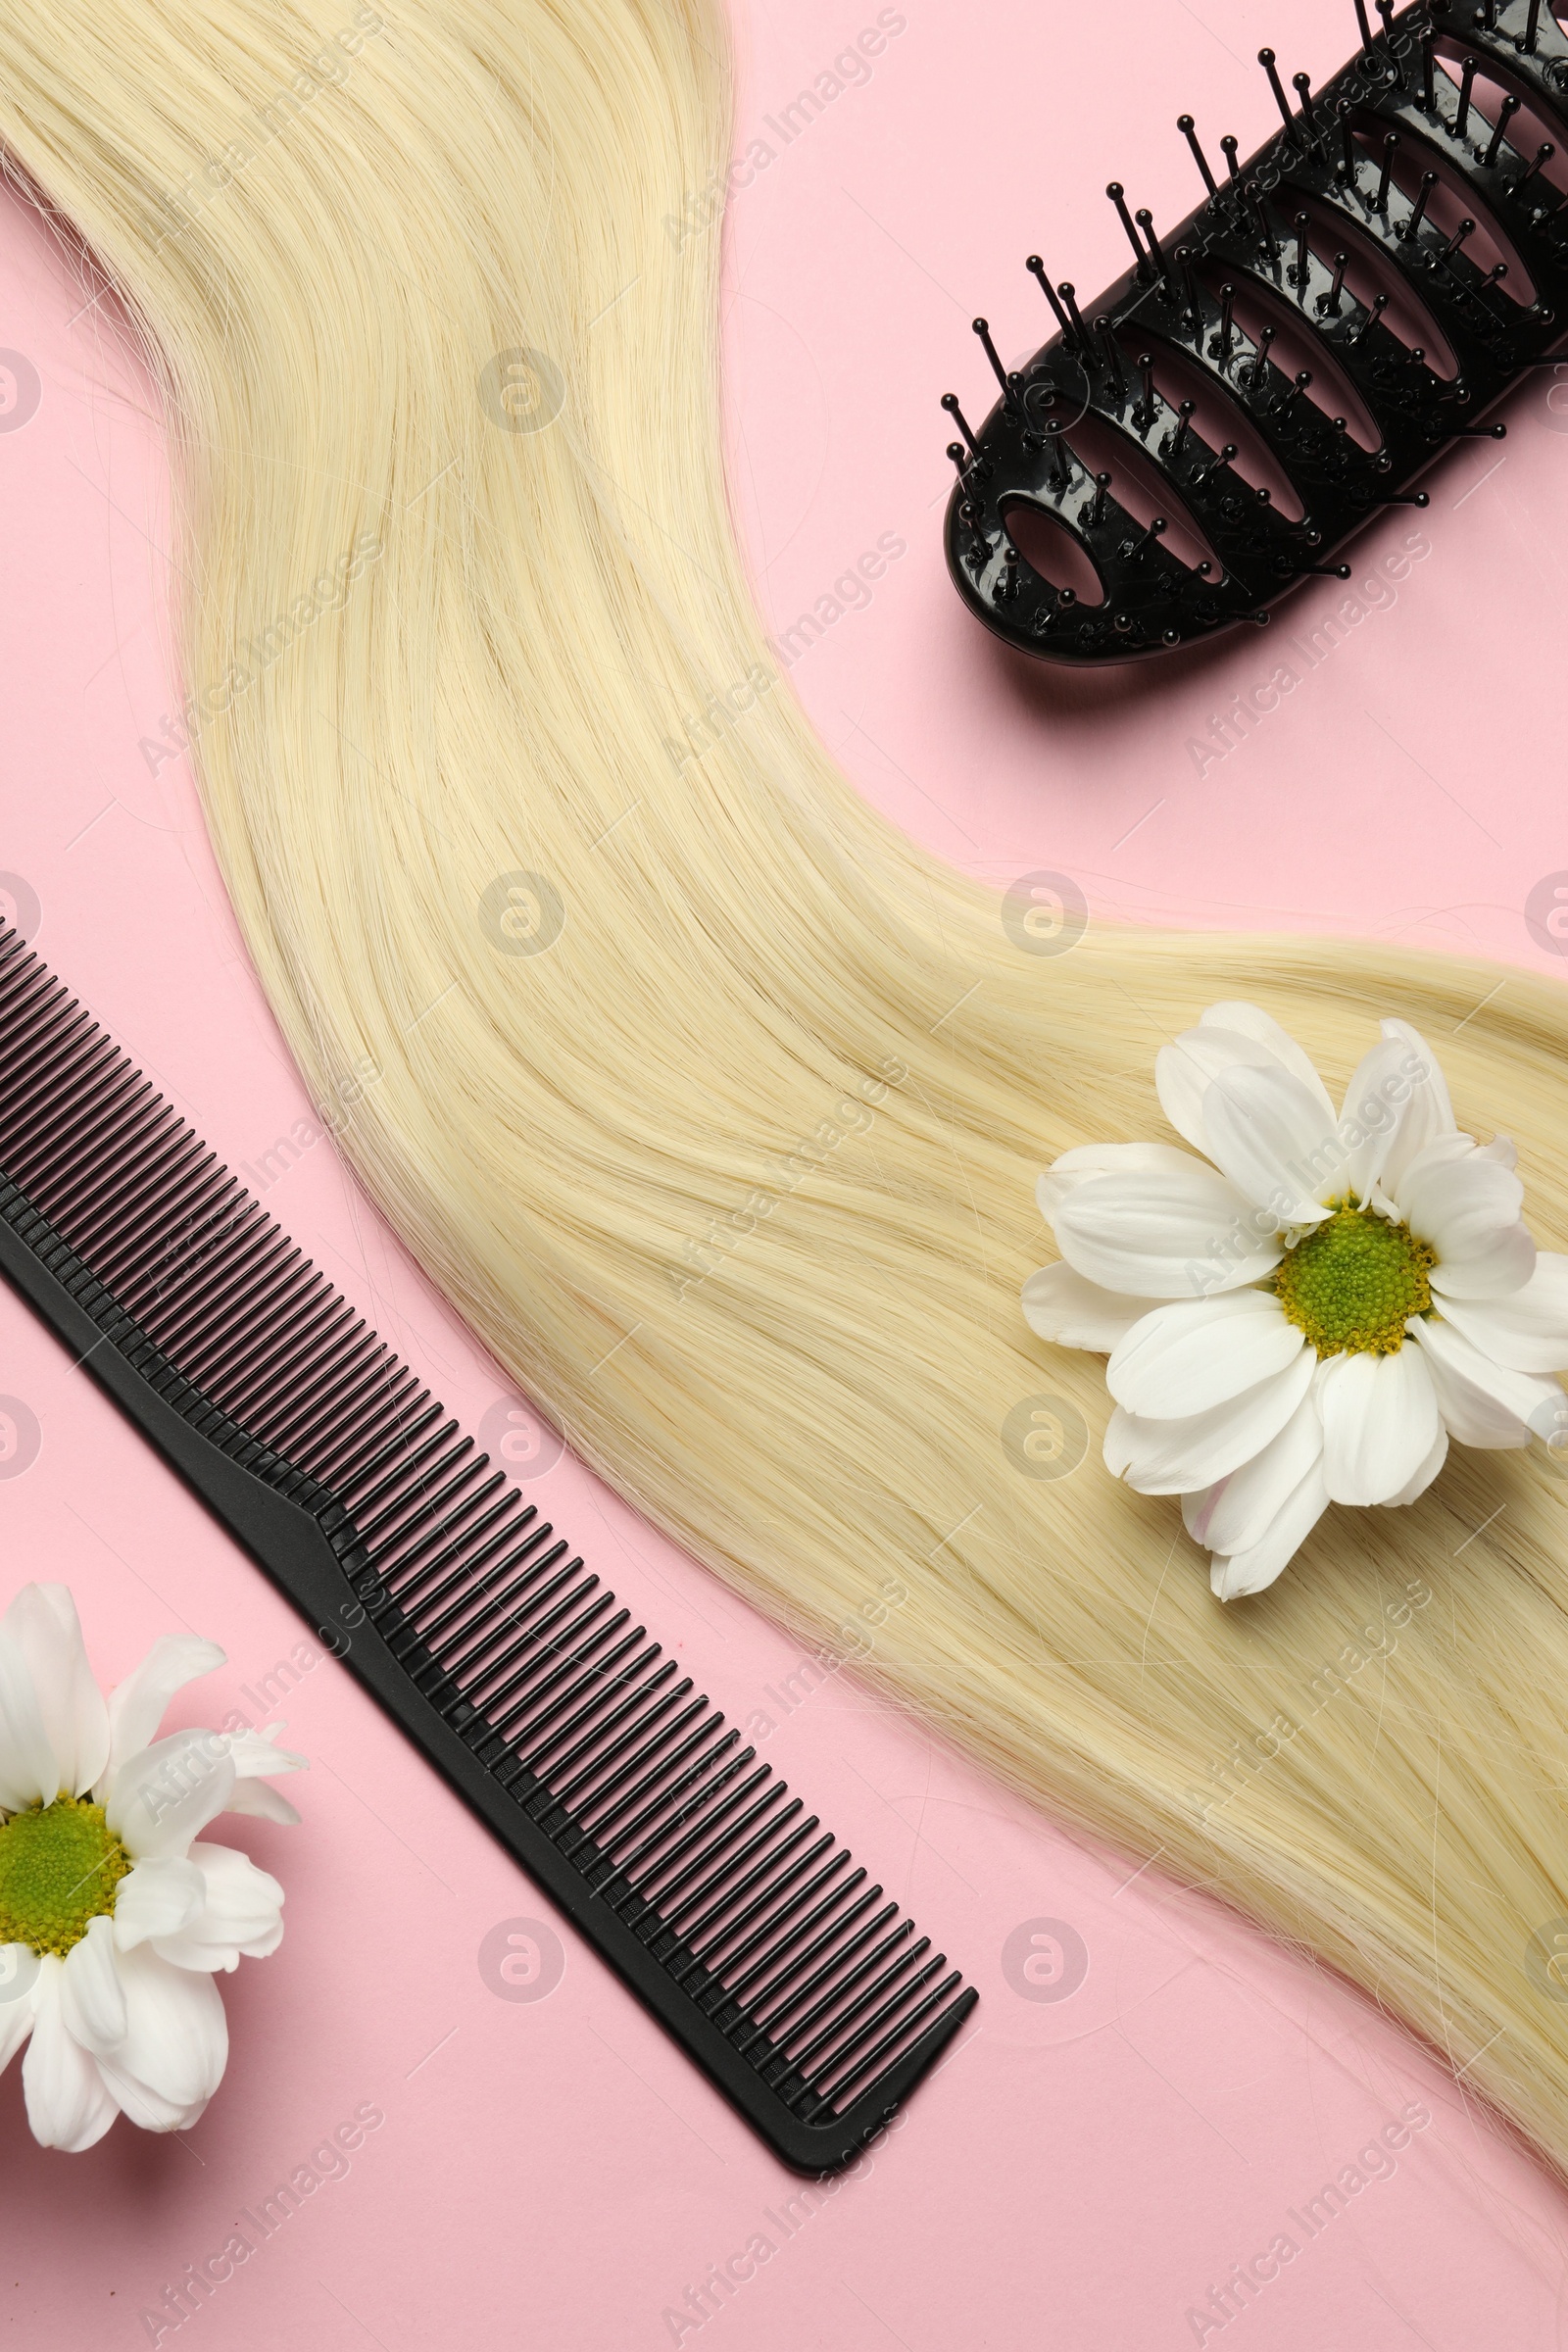 Photo of Hairdresser tools. Blonde hair lock, comb, brush and flowers on pink background, flat lay